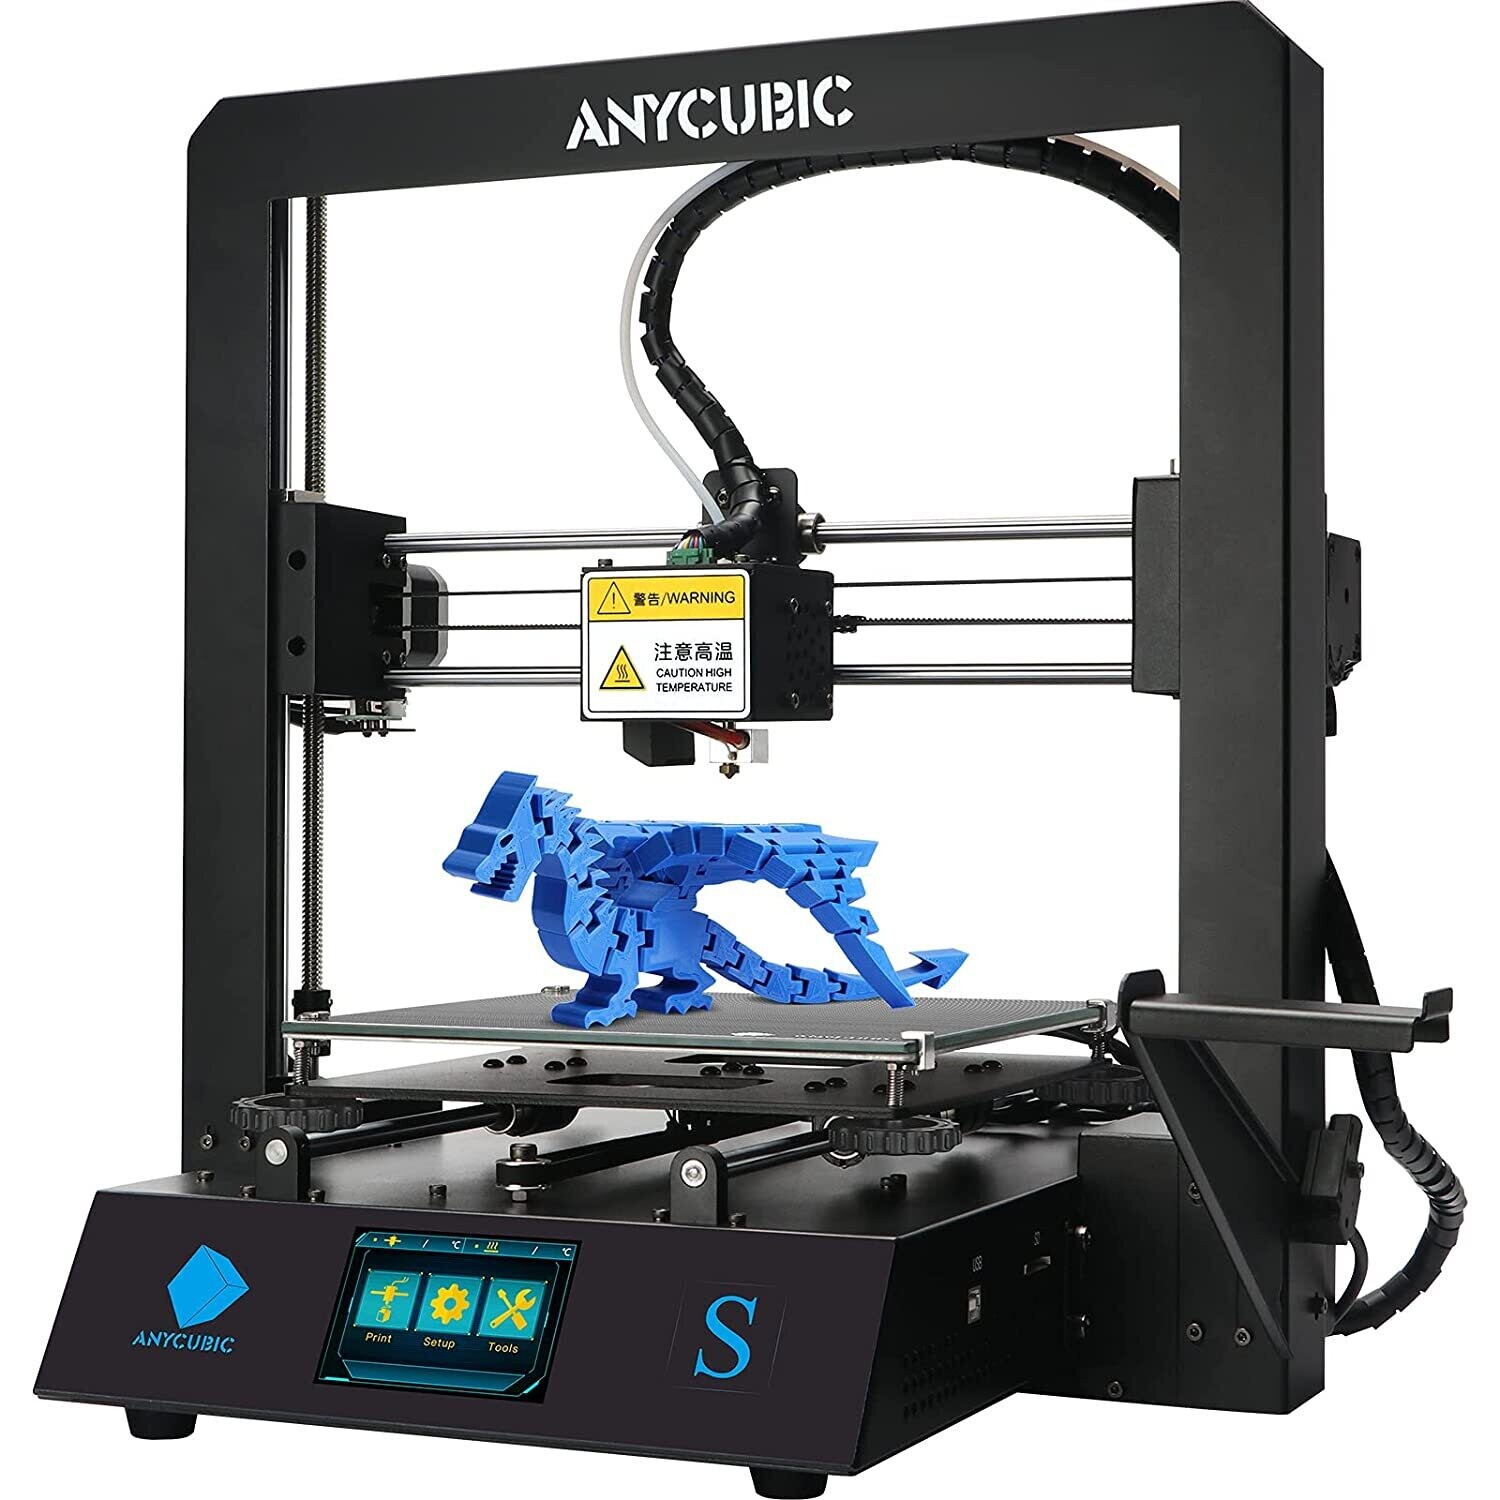 ANYCUBIC Mega-S New Upgrade 3D Printer with Extruder and Suspended Filament  Rack + Free Test PLA Filament, Works with TPU/PLA/ABS